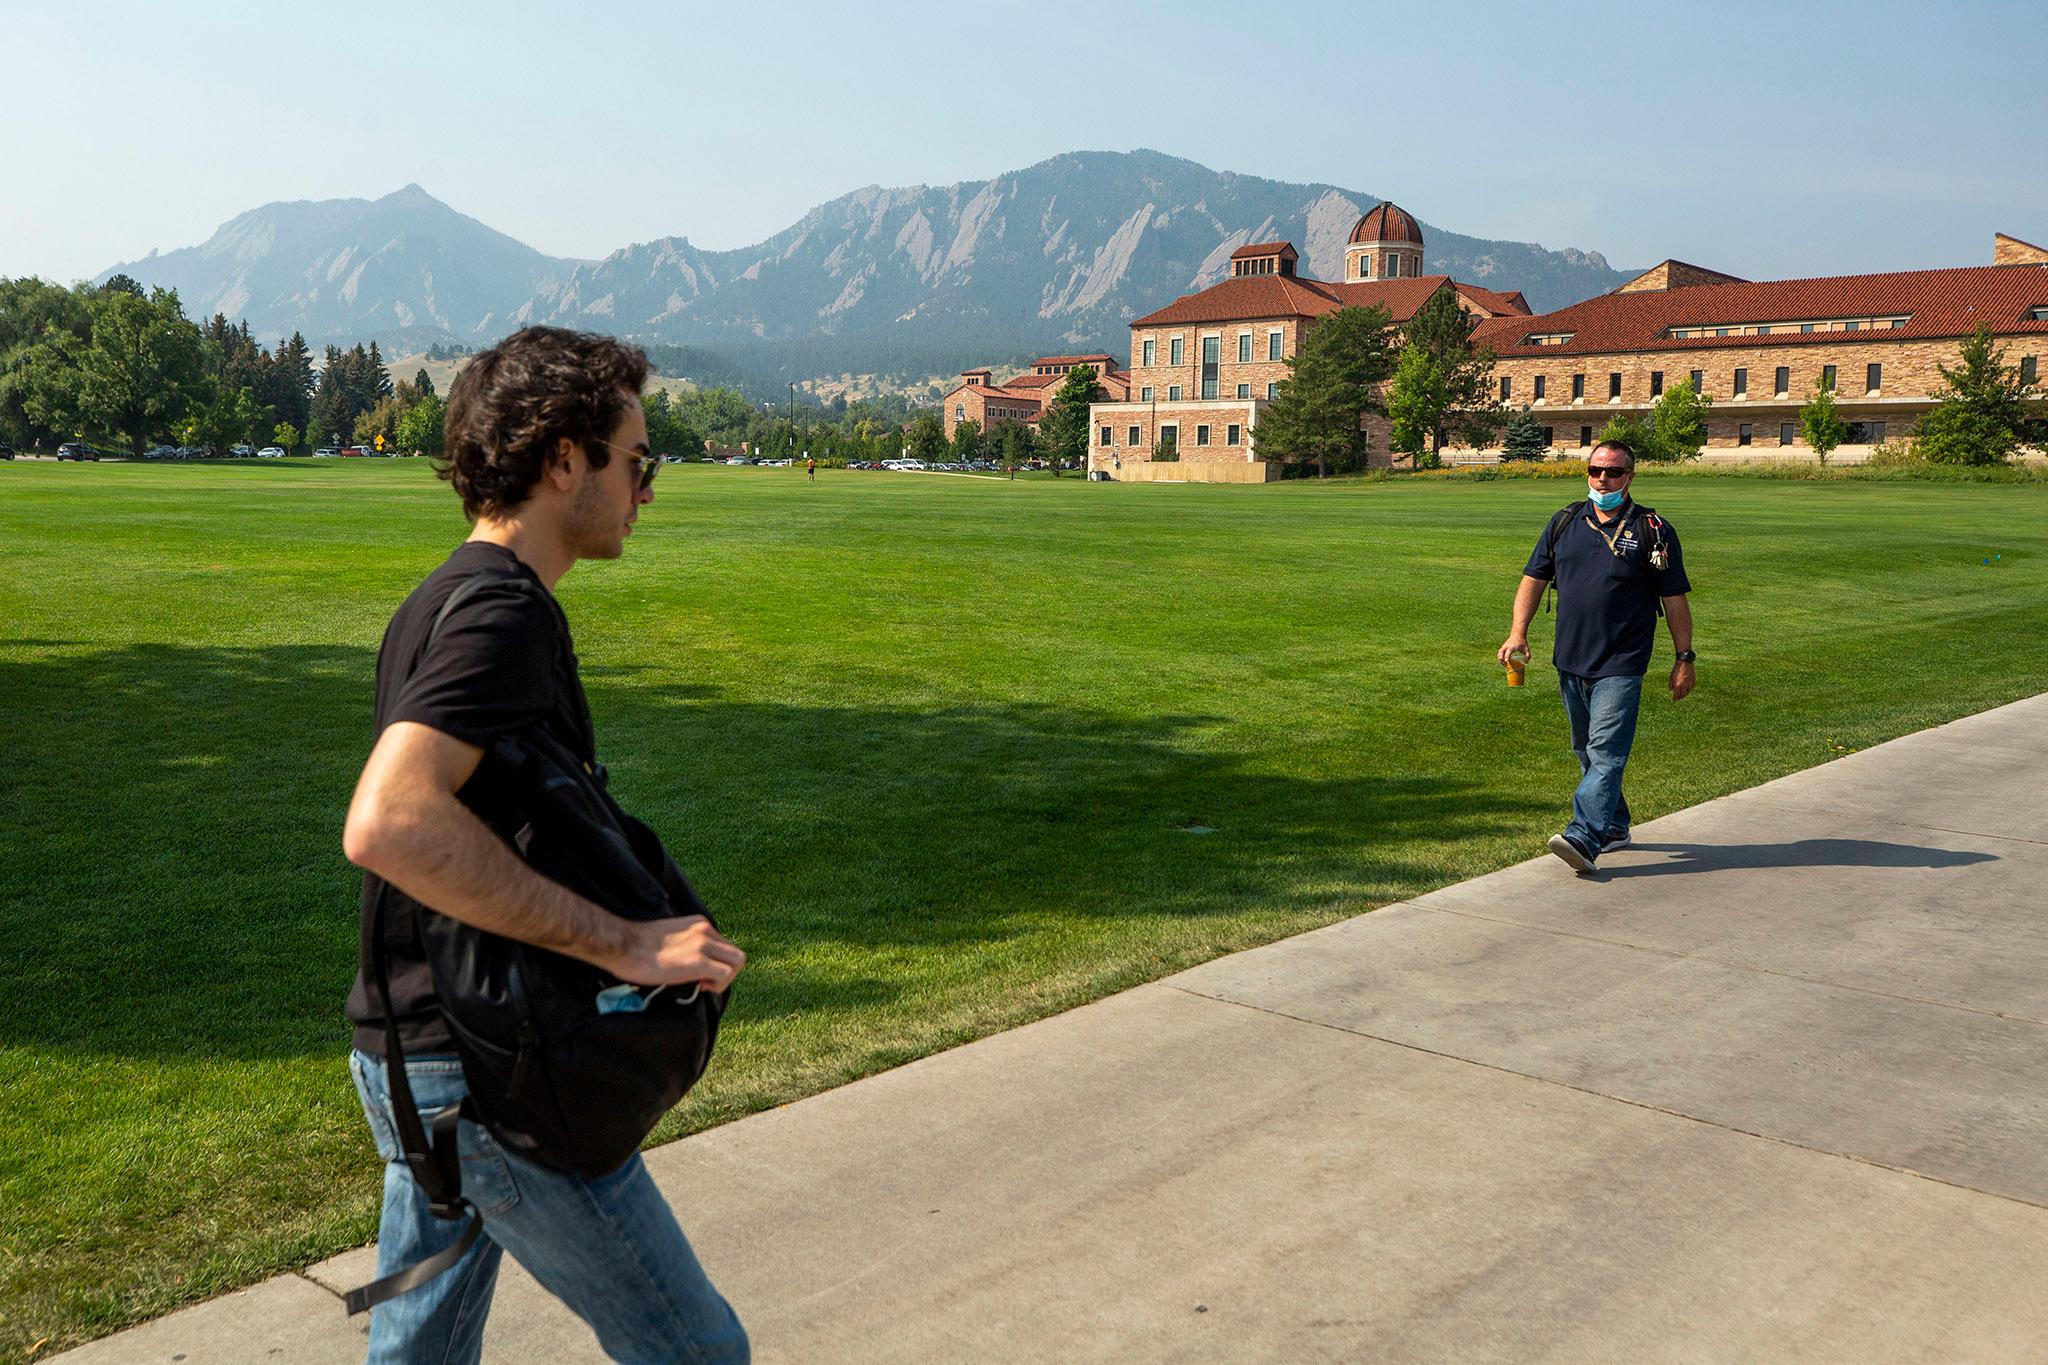 On campus at the University of Colorado Boulder. Sept. 8, 2021.